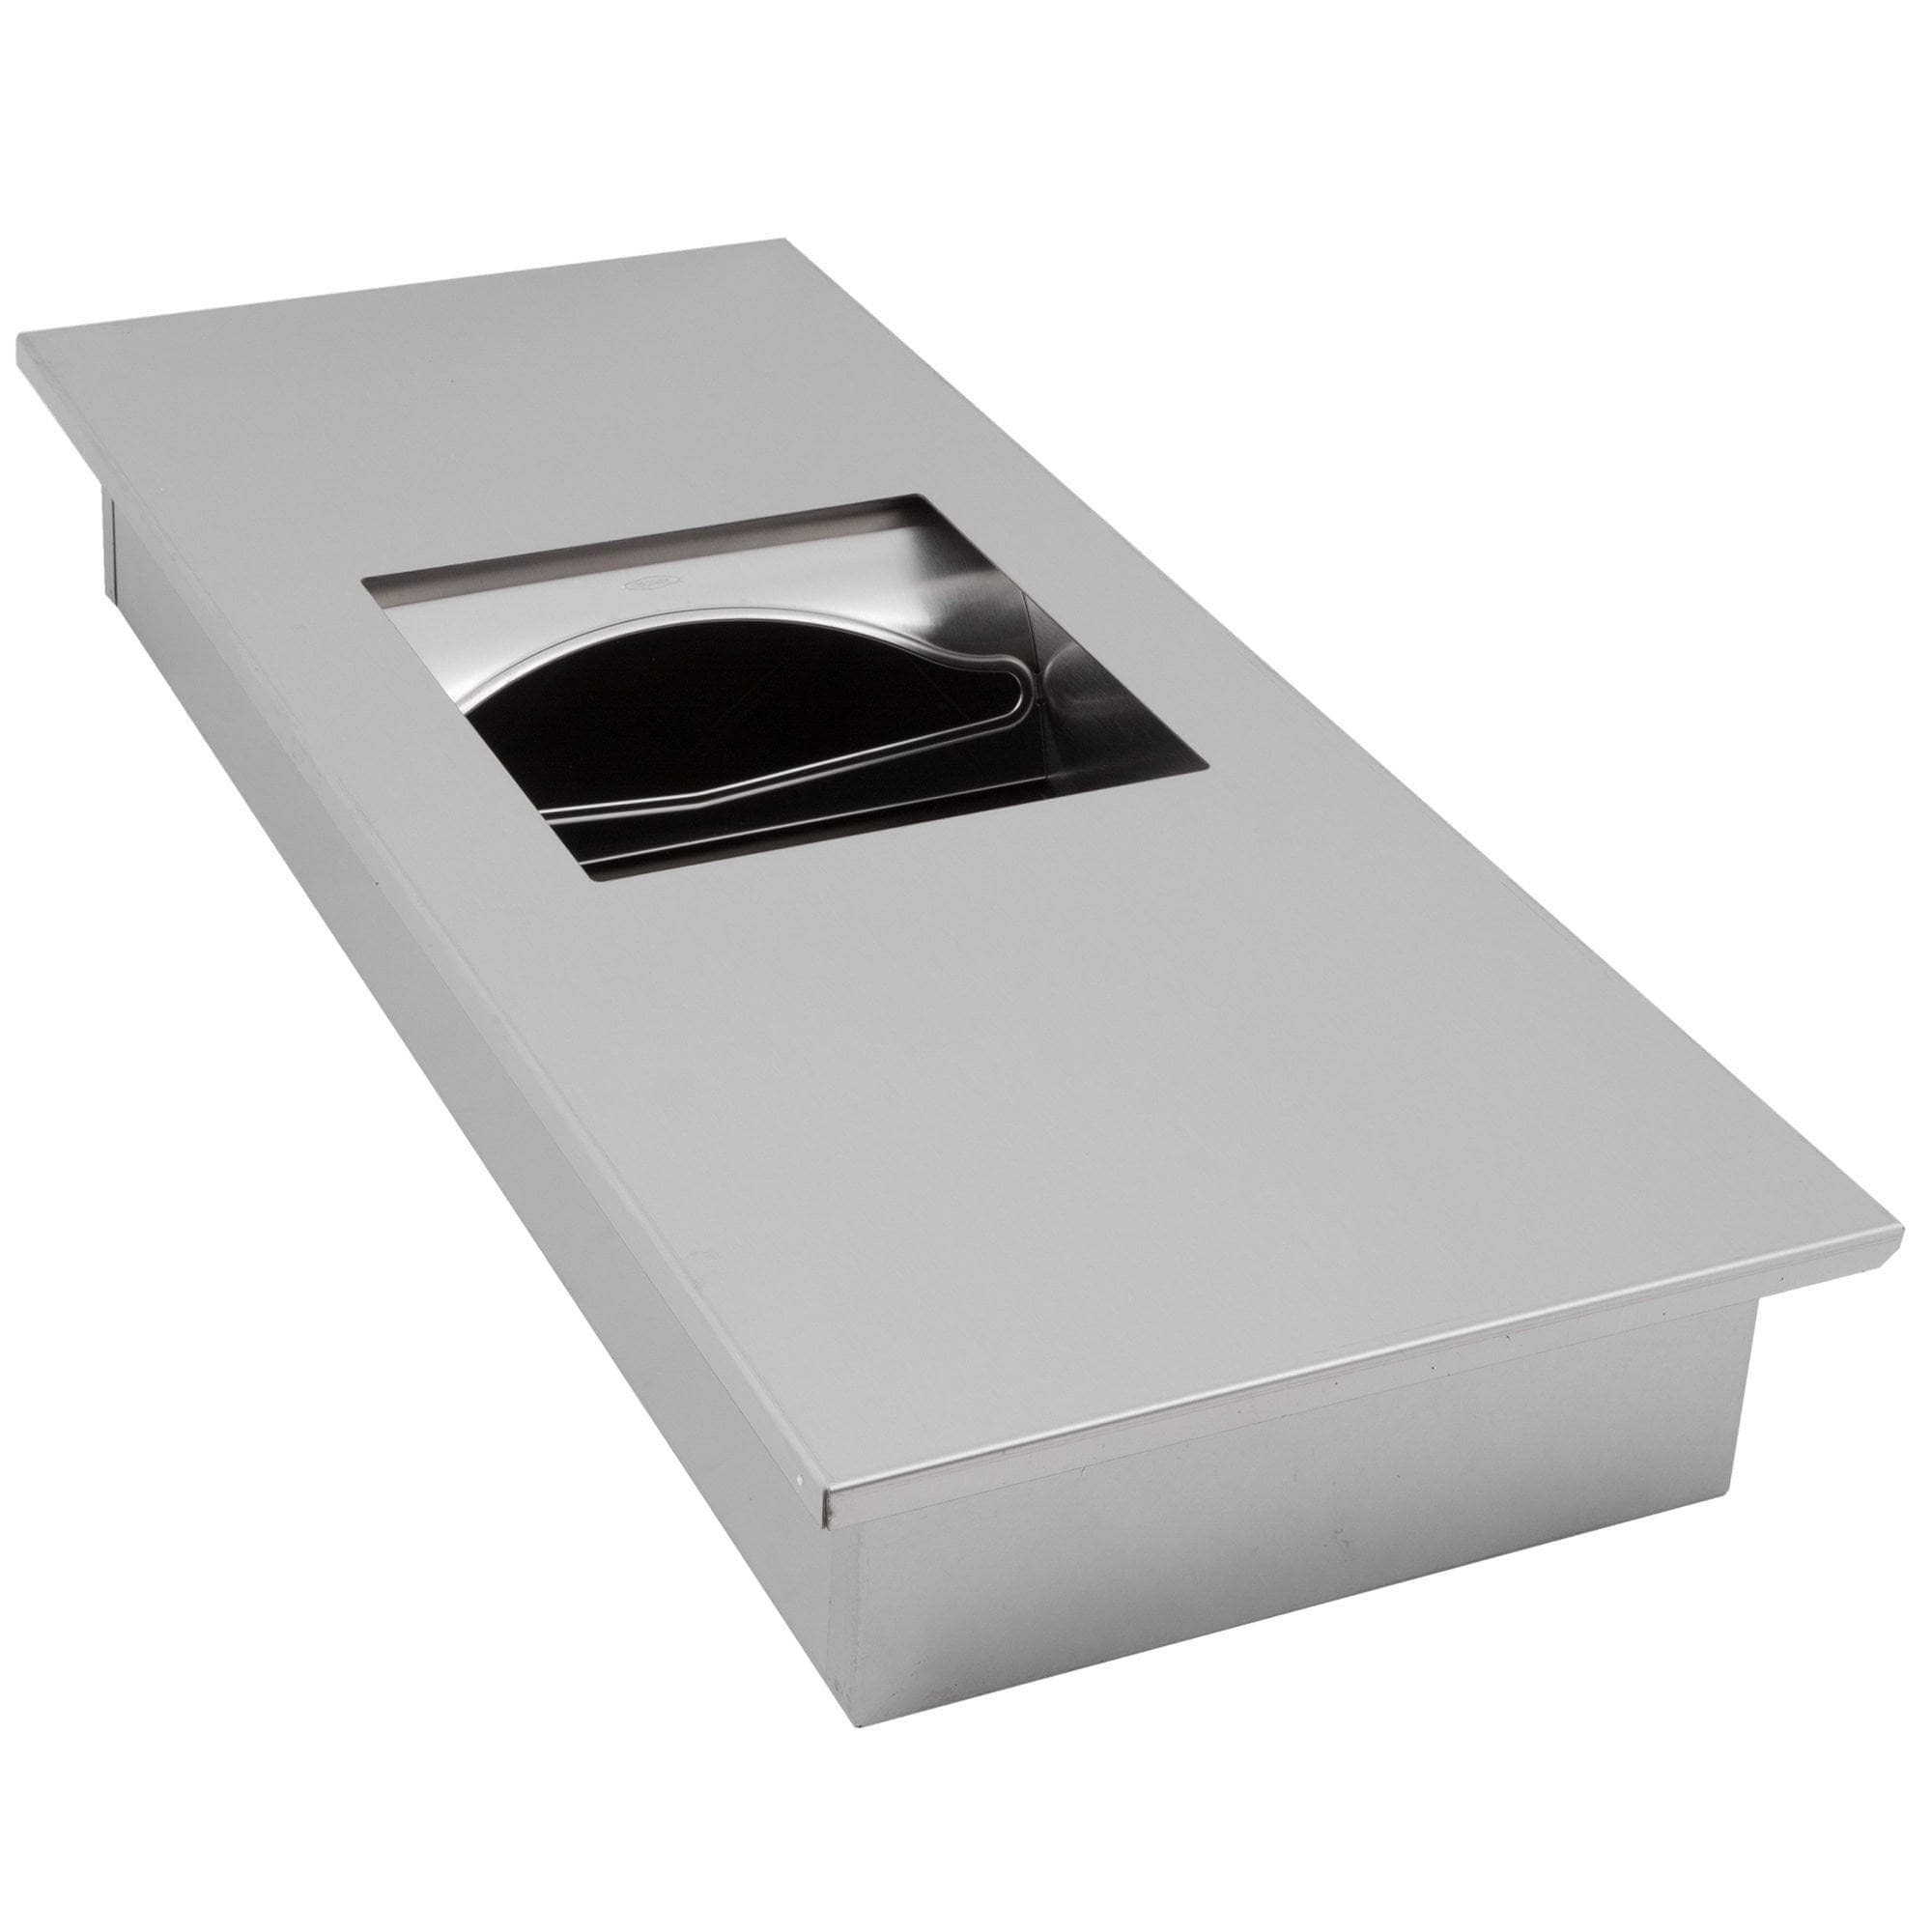 Bobrick B-36903 Combination Commercial Paper Towel Dispenser/Waste Receptacle, Recessed-Mounted, Stainless Steel - TotalRestroom.com